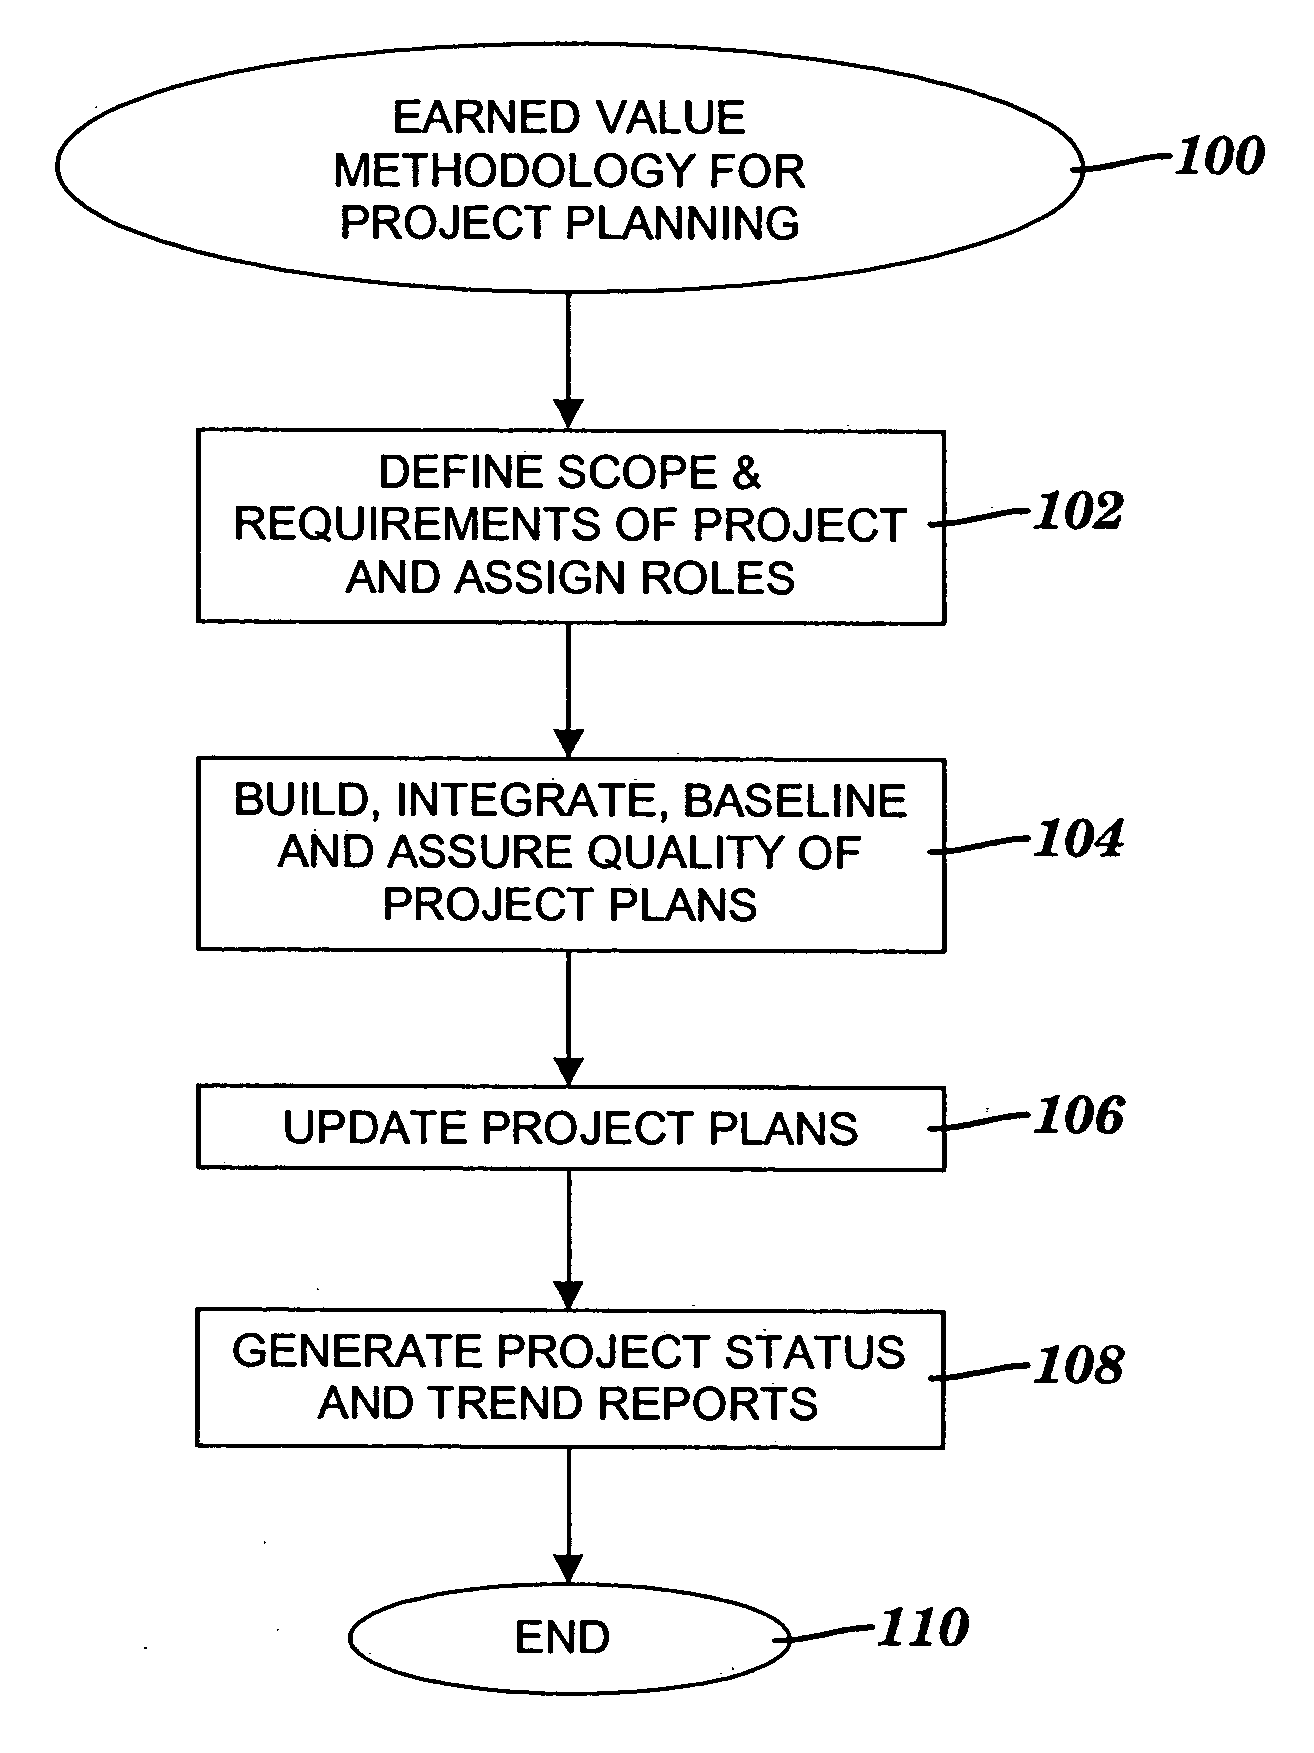 Method and system for validating tasks